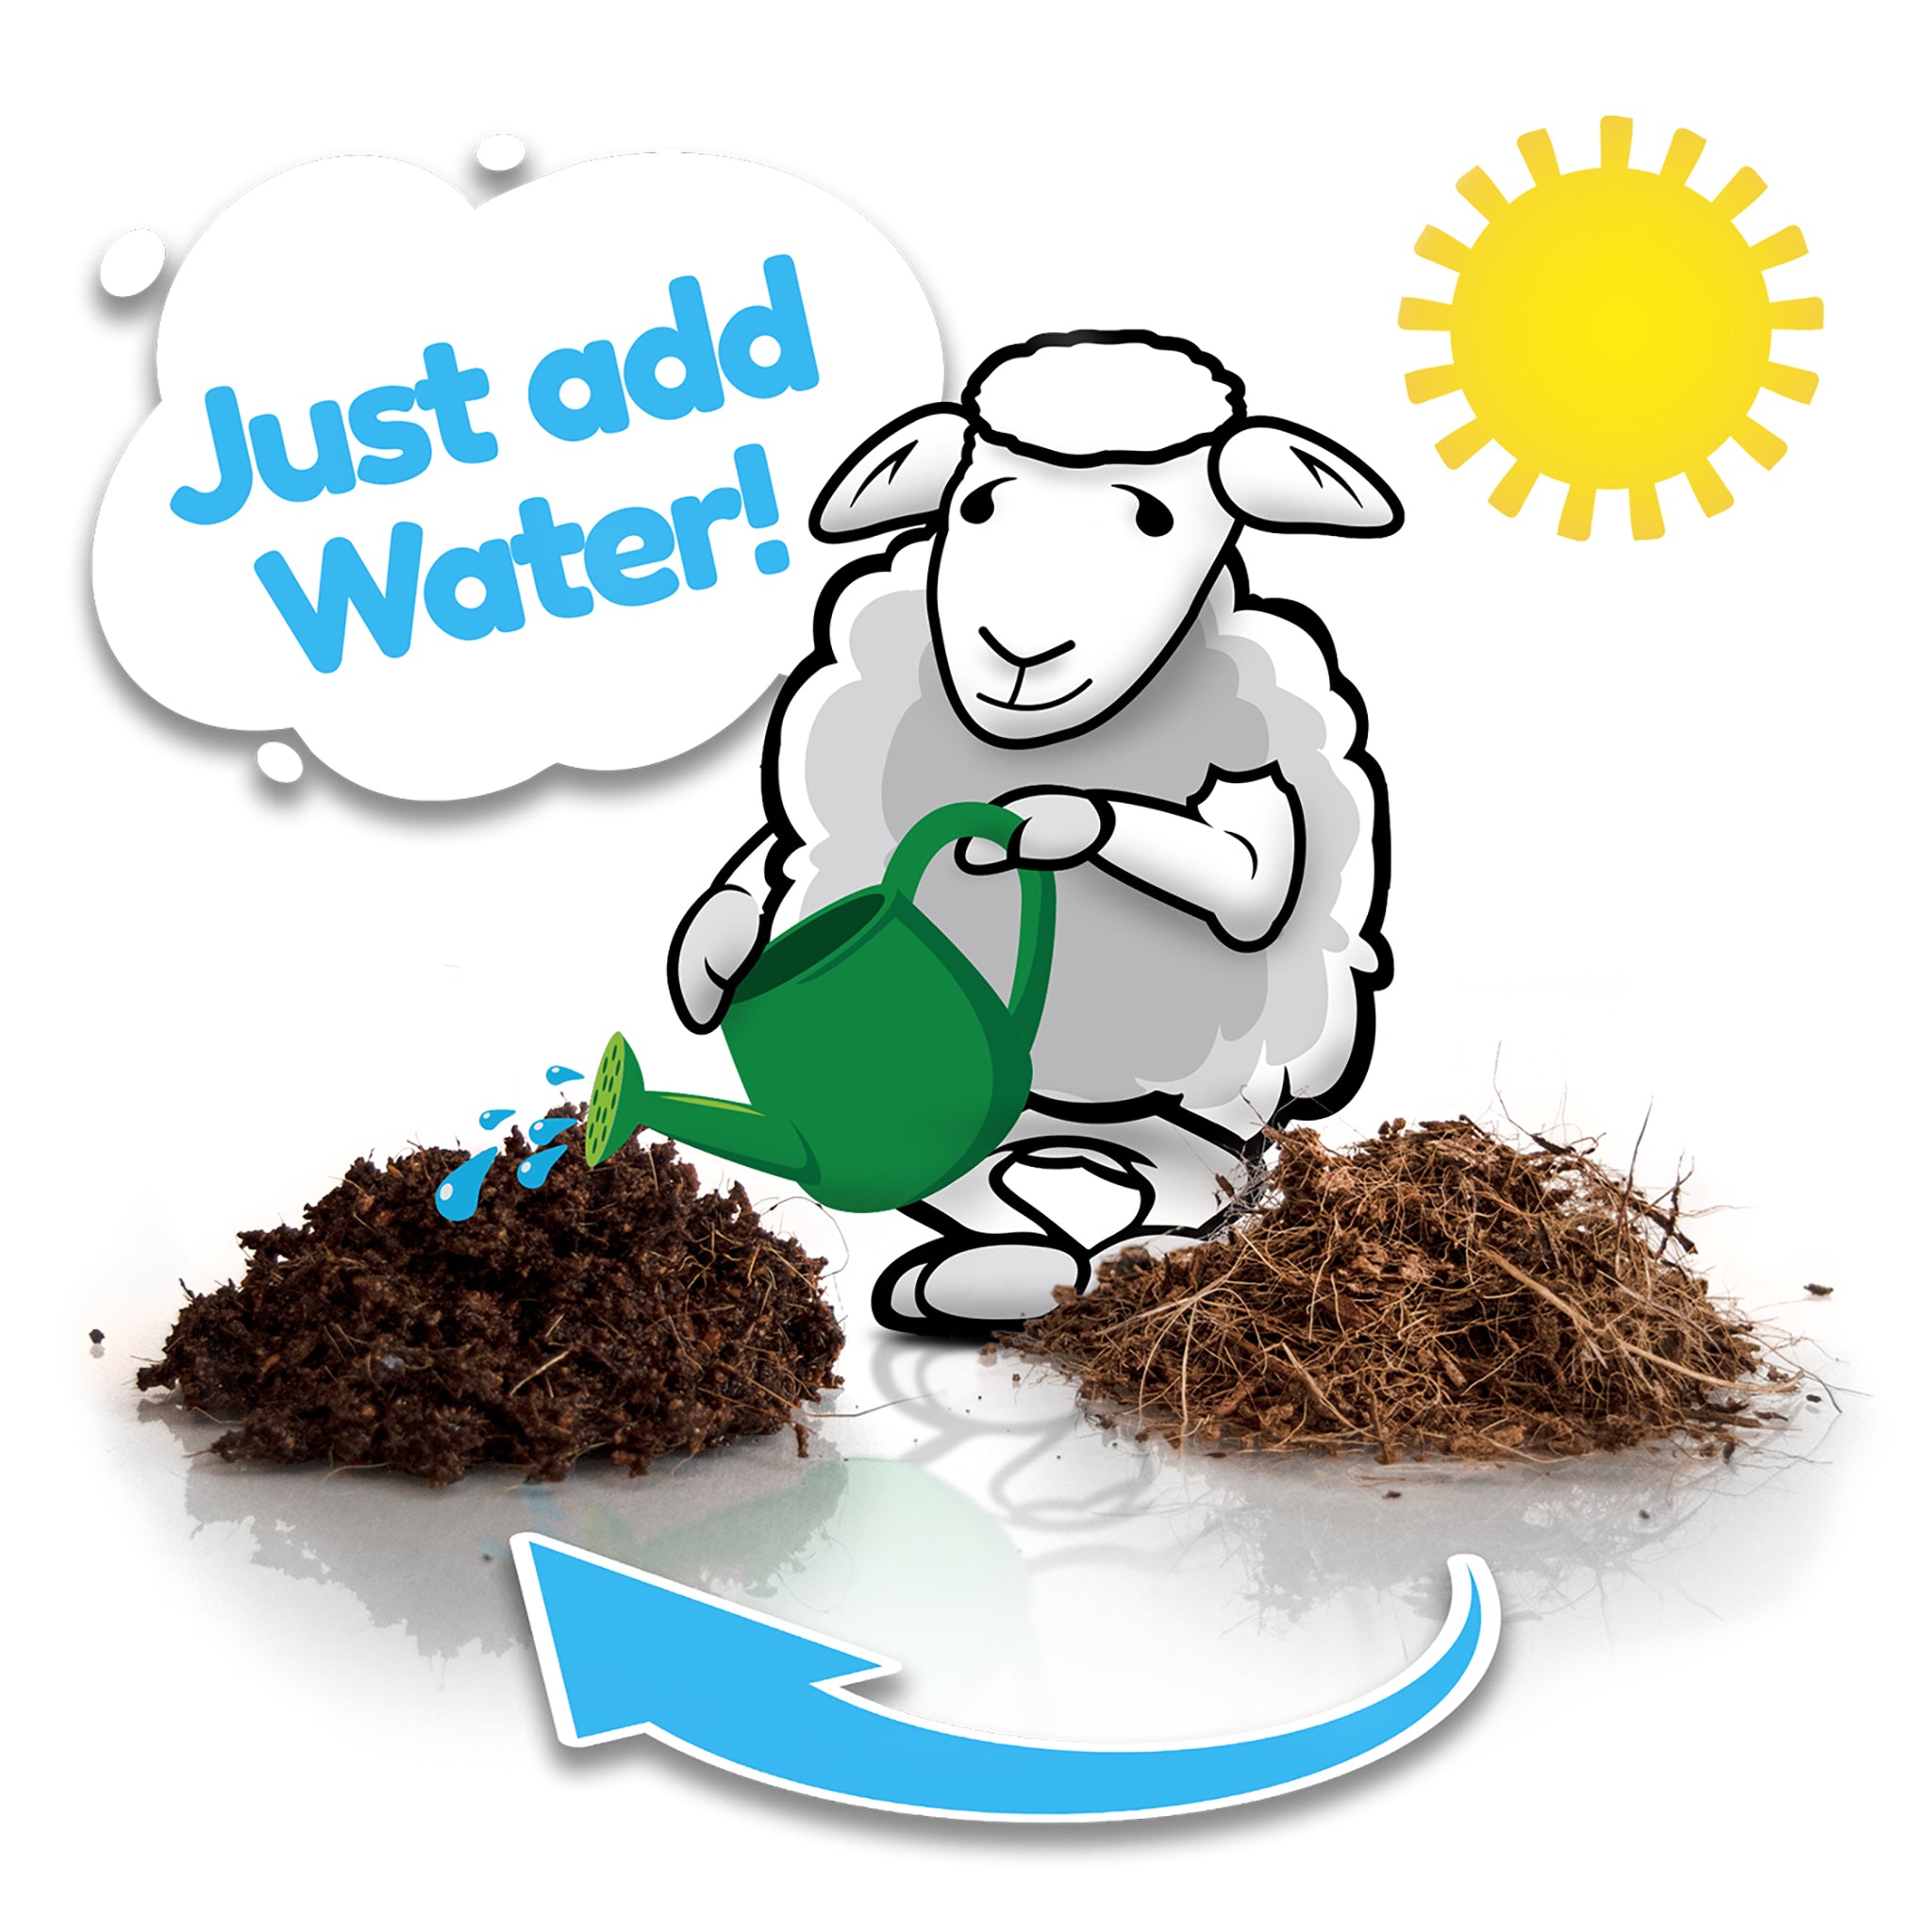 gardening chimney sheep with just add water text by a pile of cocopeat